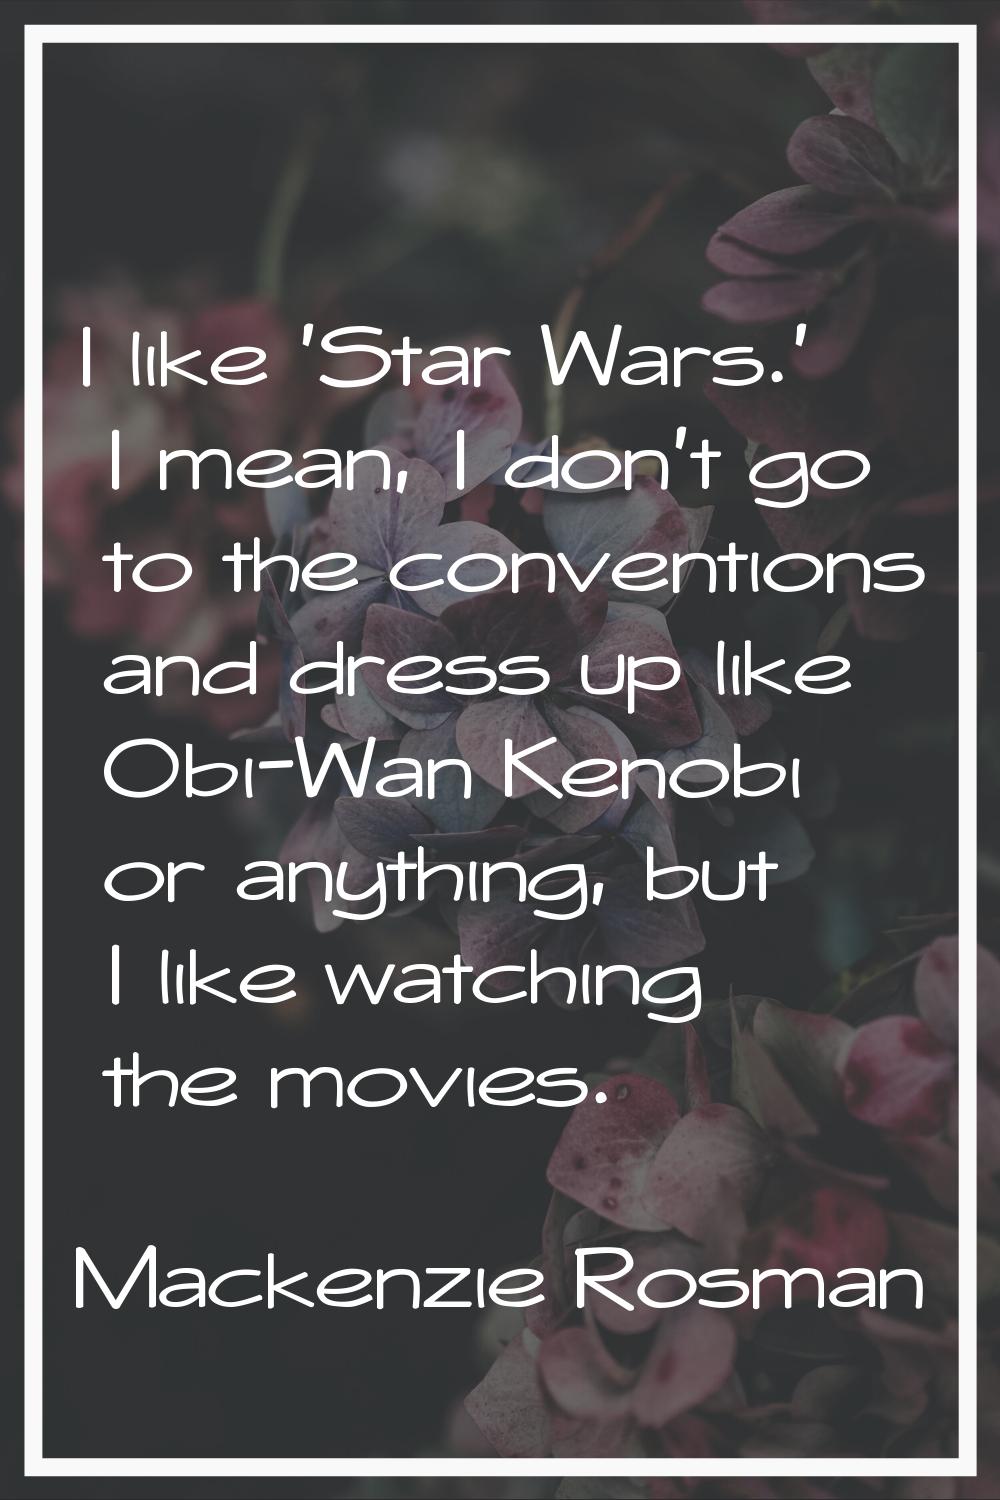 I like 'Star Wars.' I mean, I don't go to the conventions and dress up like Obi-Wan Kenobi or anyth